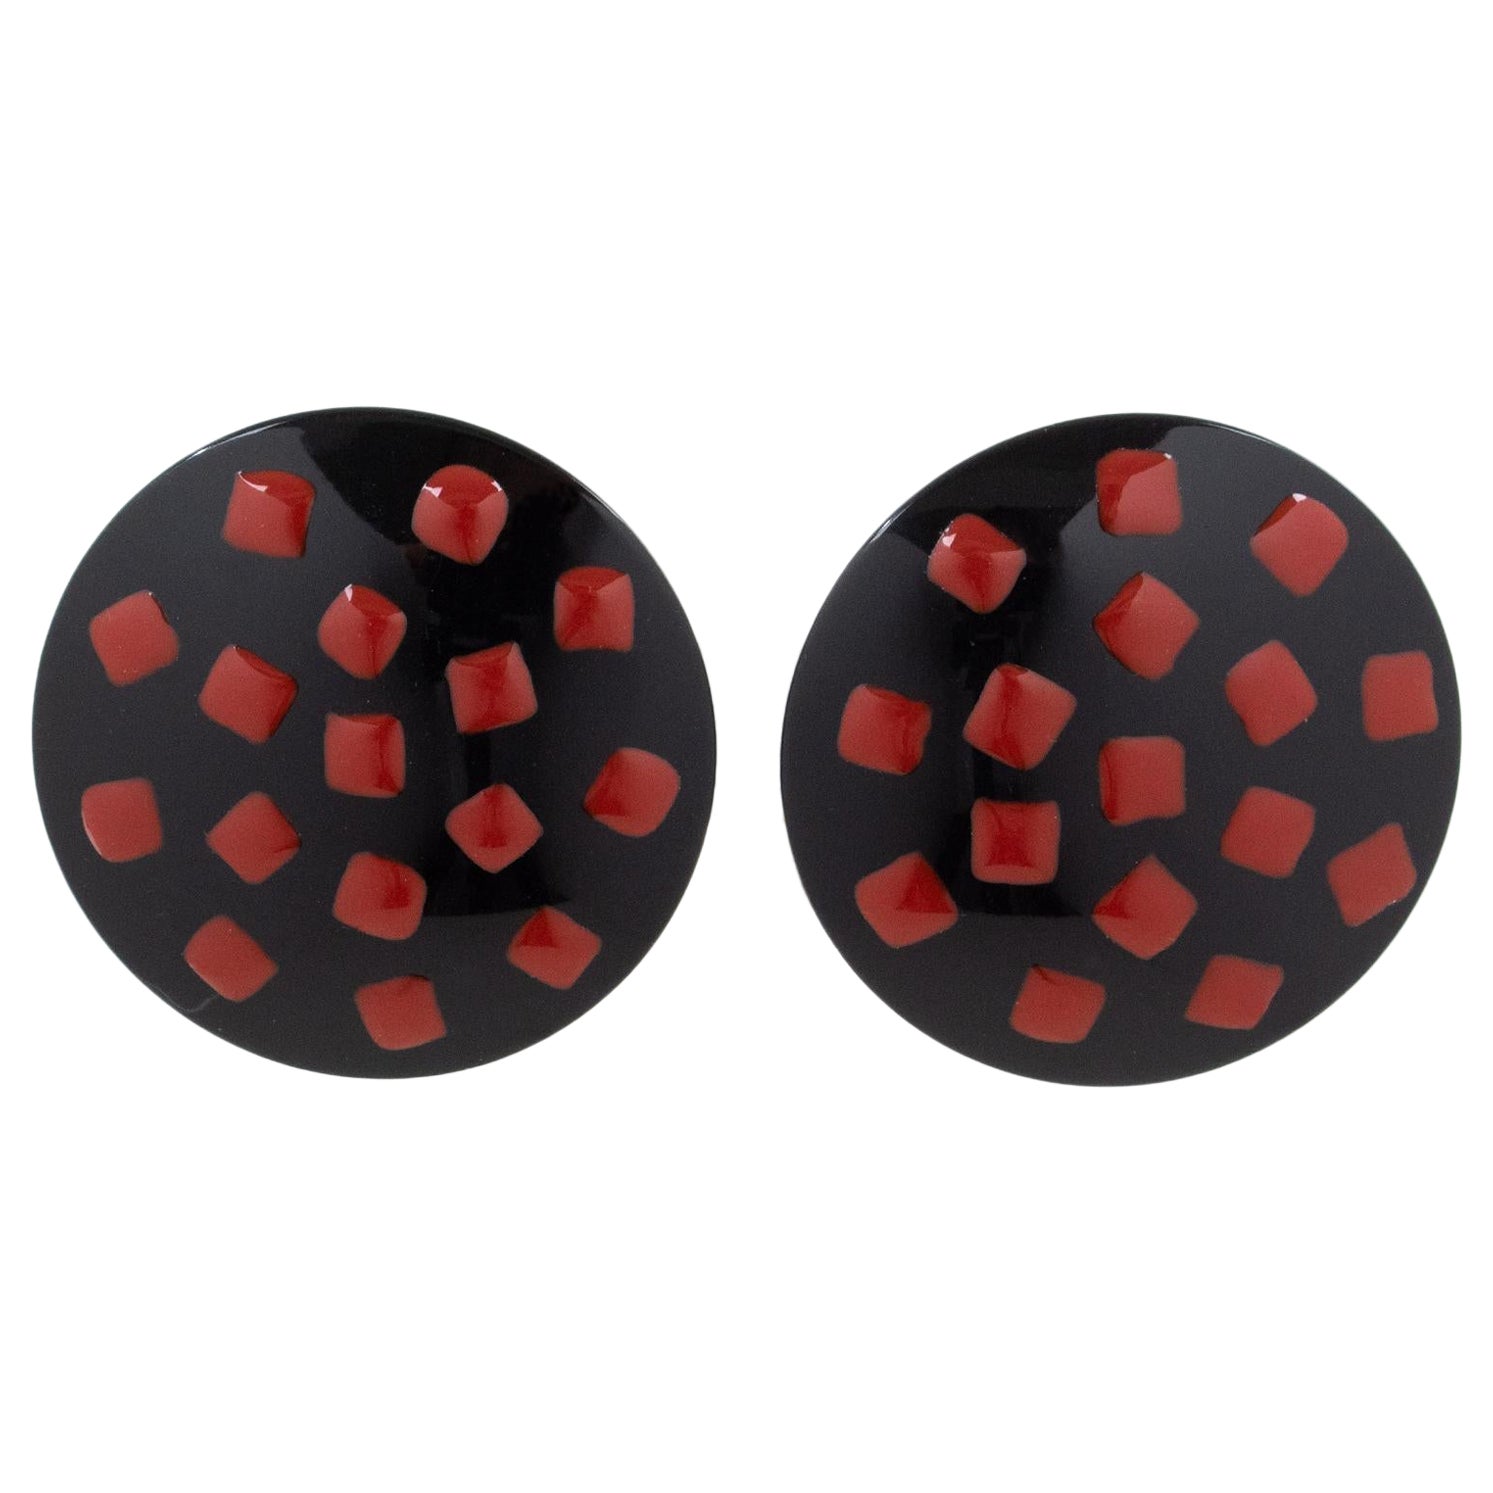 Missoni Italy Oversized Black Lucite Resin Clip Earrings with Red Dots